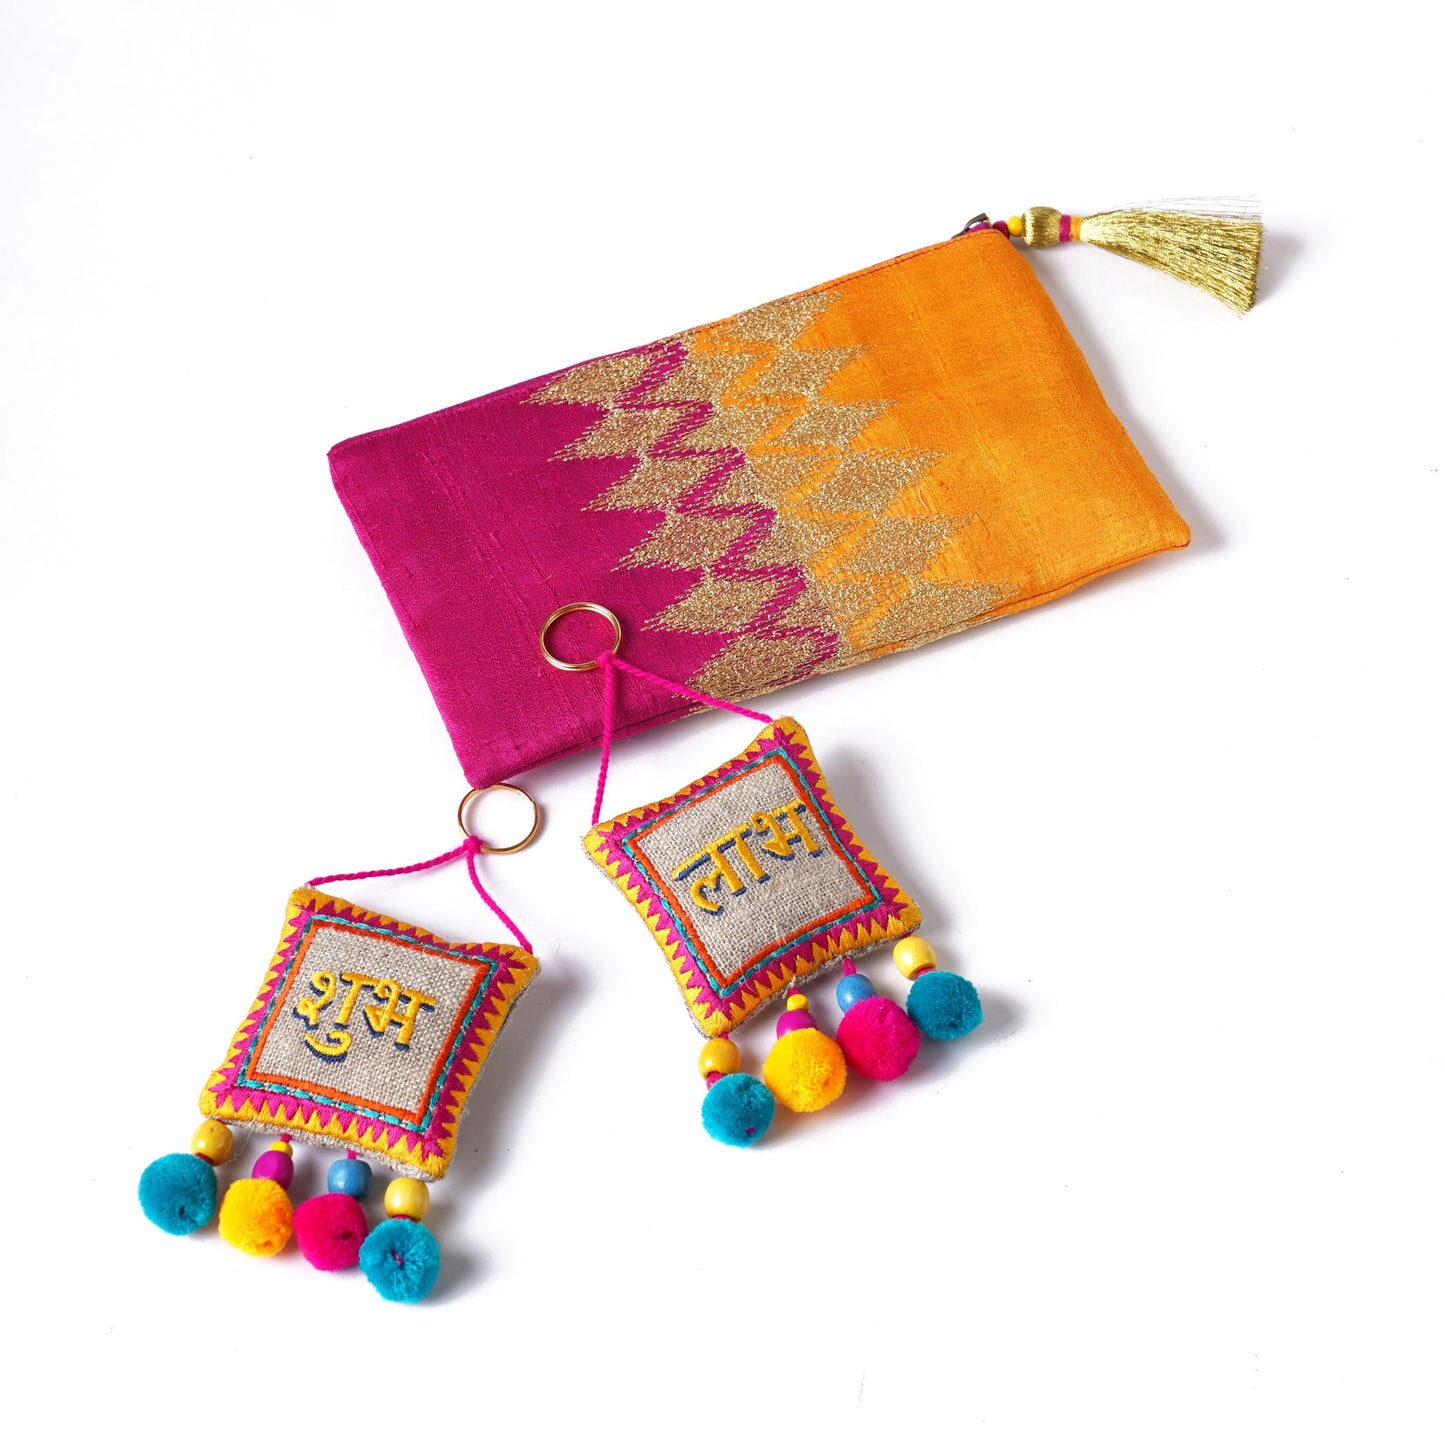 DIWALI GIFT PACK - Embroidered Silk clutch with pair of SHUBH-LABH tassels